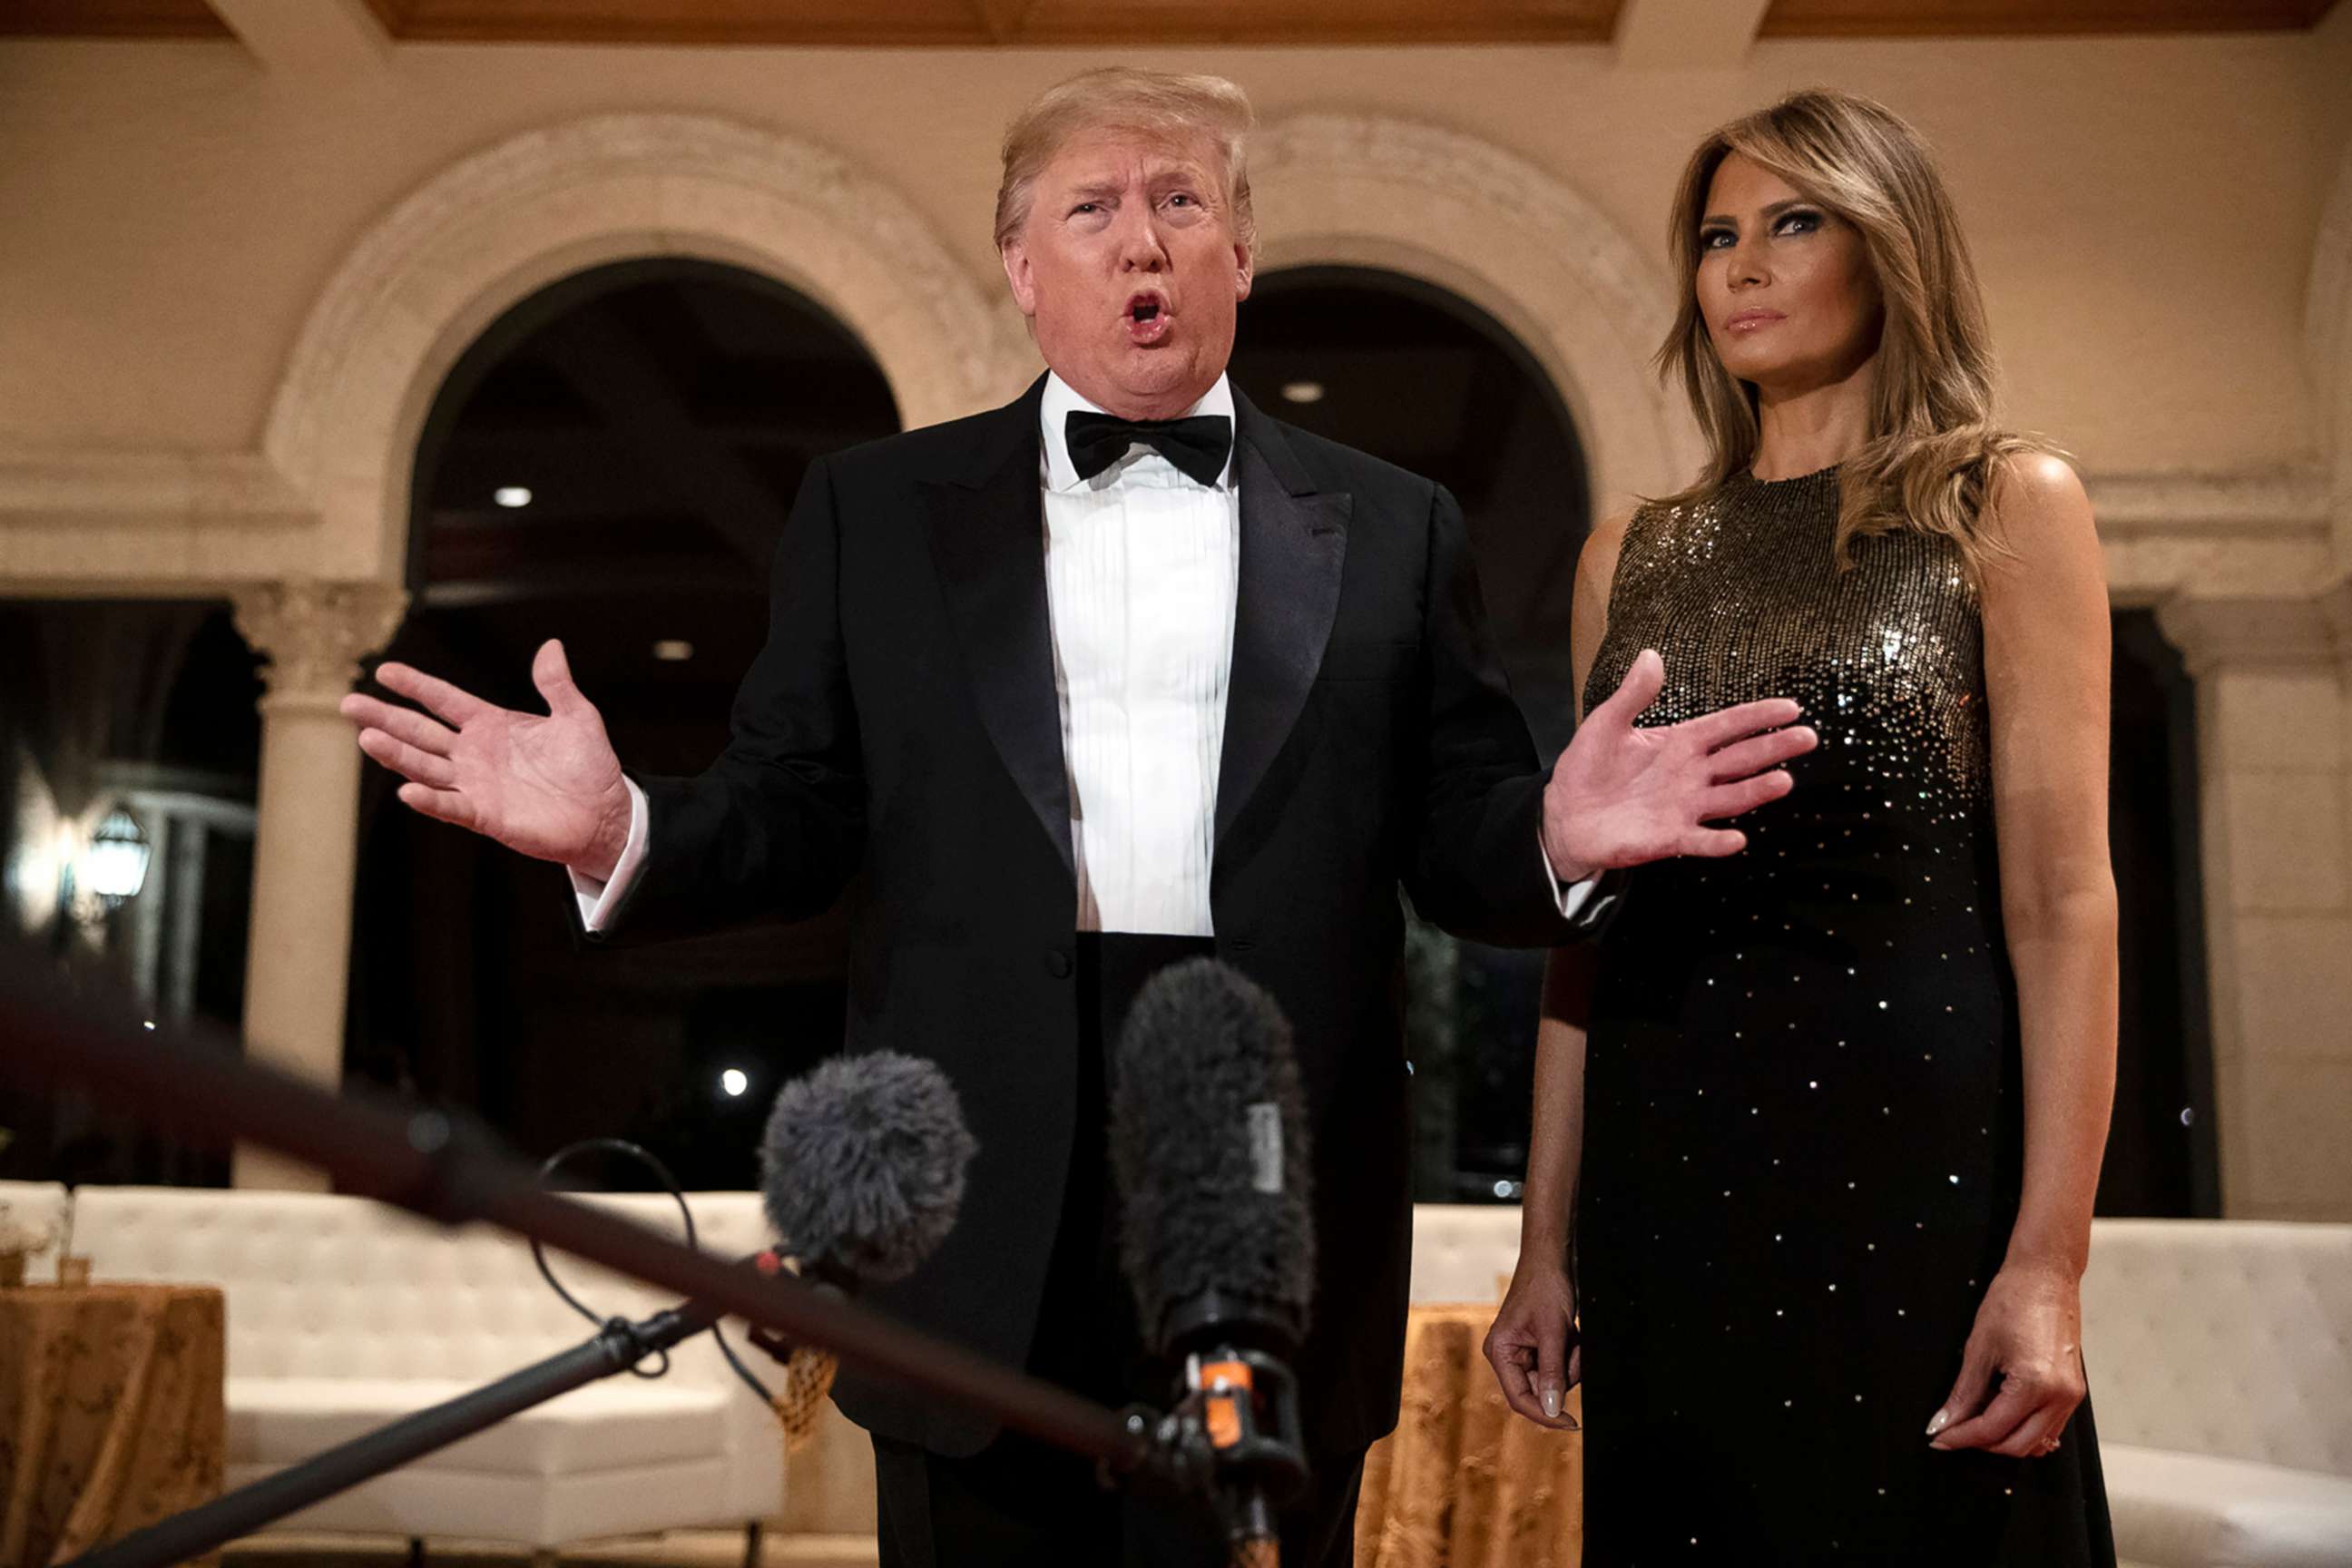 PHOTO: First lady Melania Trump listens as President Donald Trump speaks to reporters before his New Year's Eve party at his Mar-a-Lago property, Dec. 31, 2019, in Palm Beach, Fla.